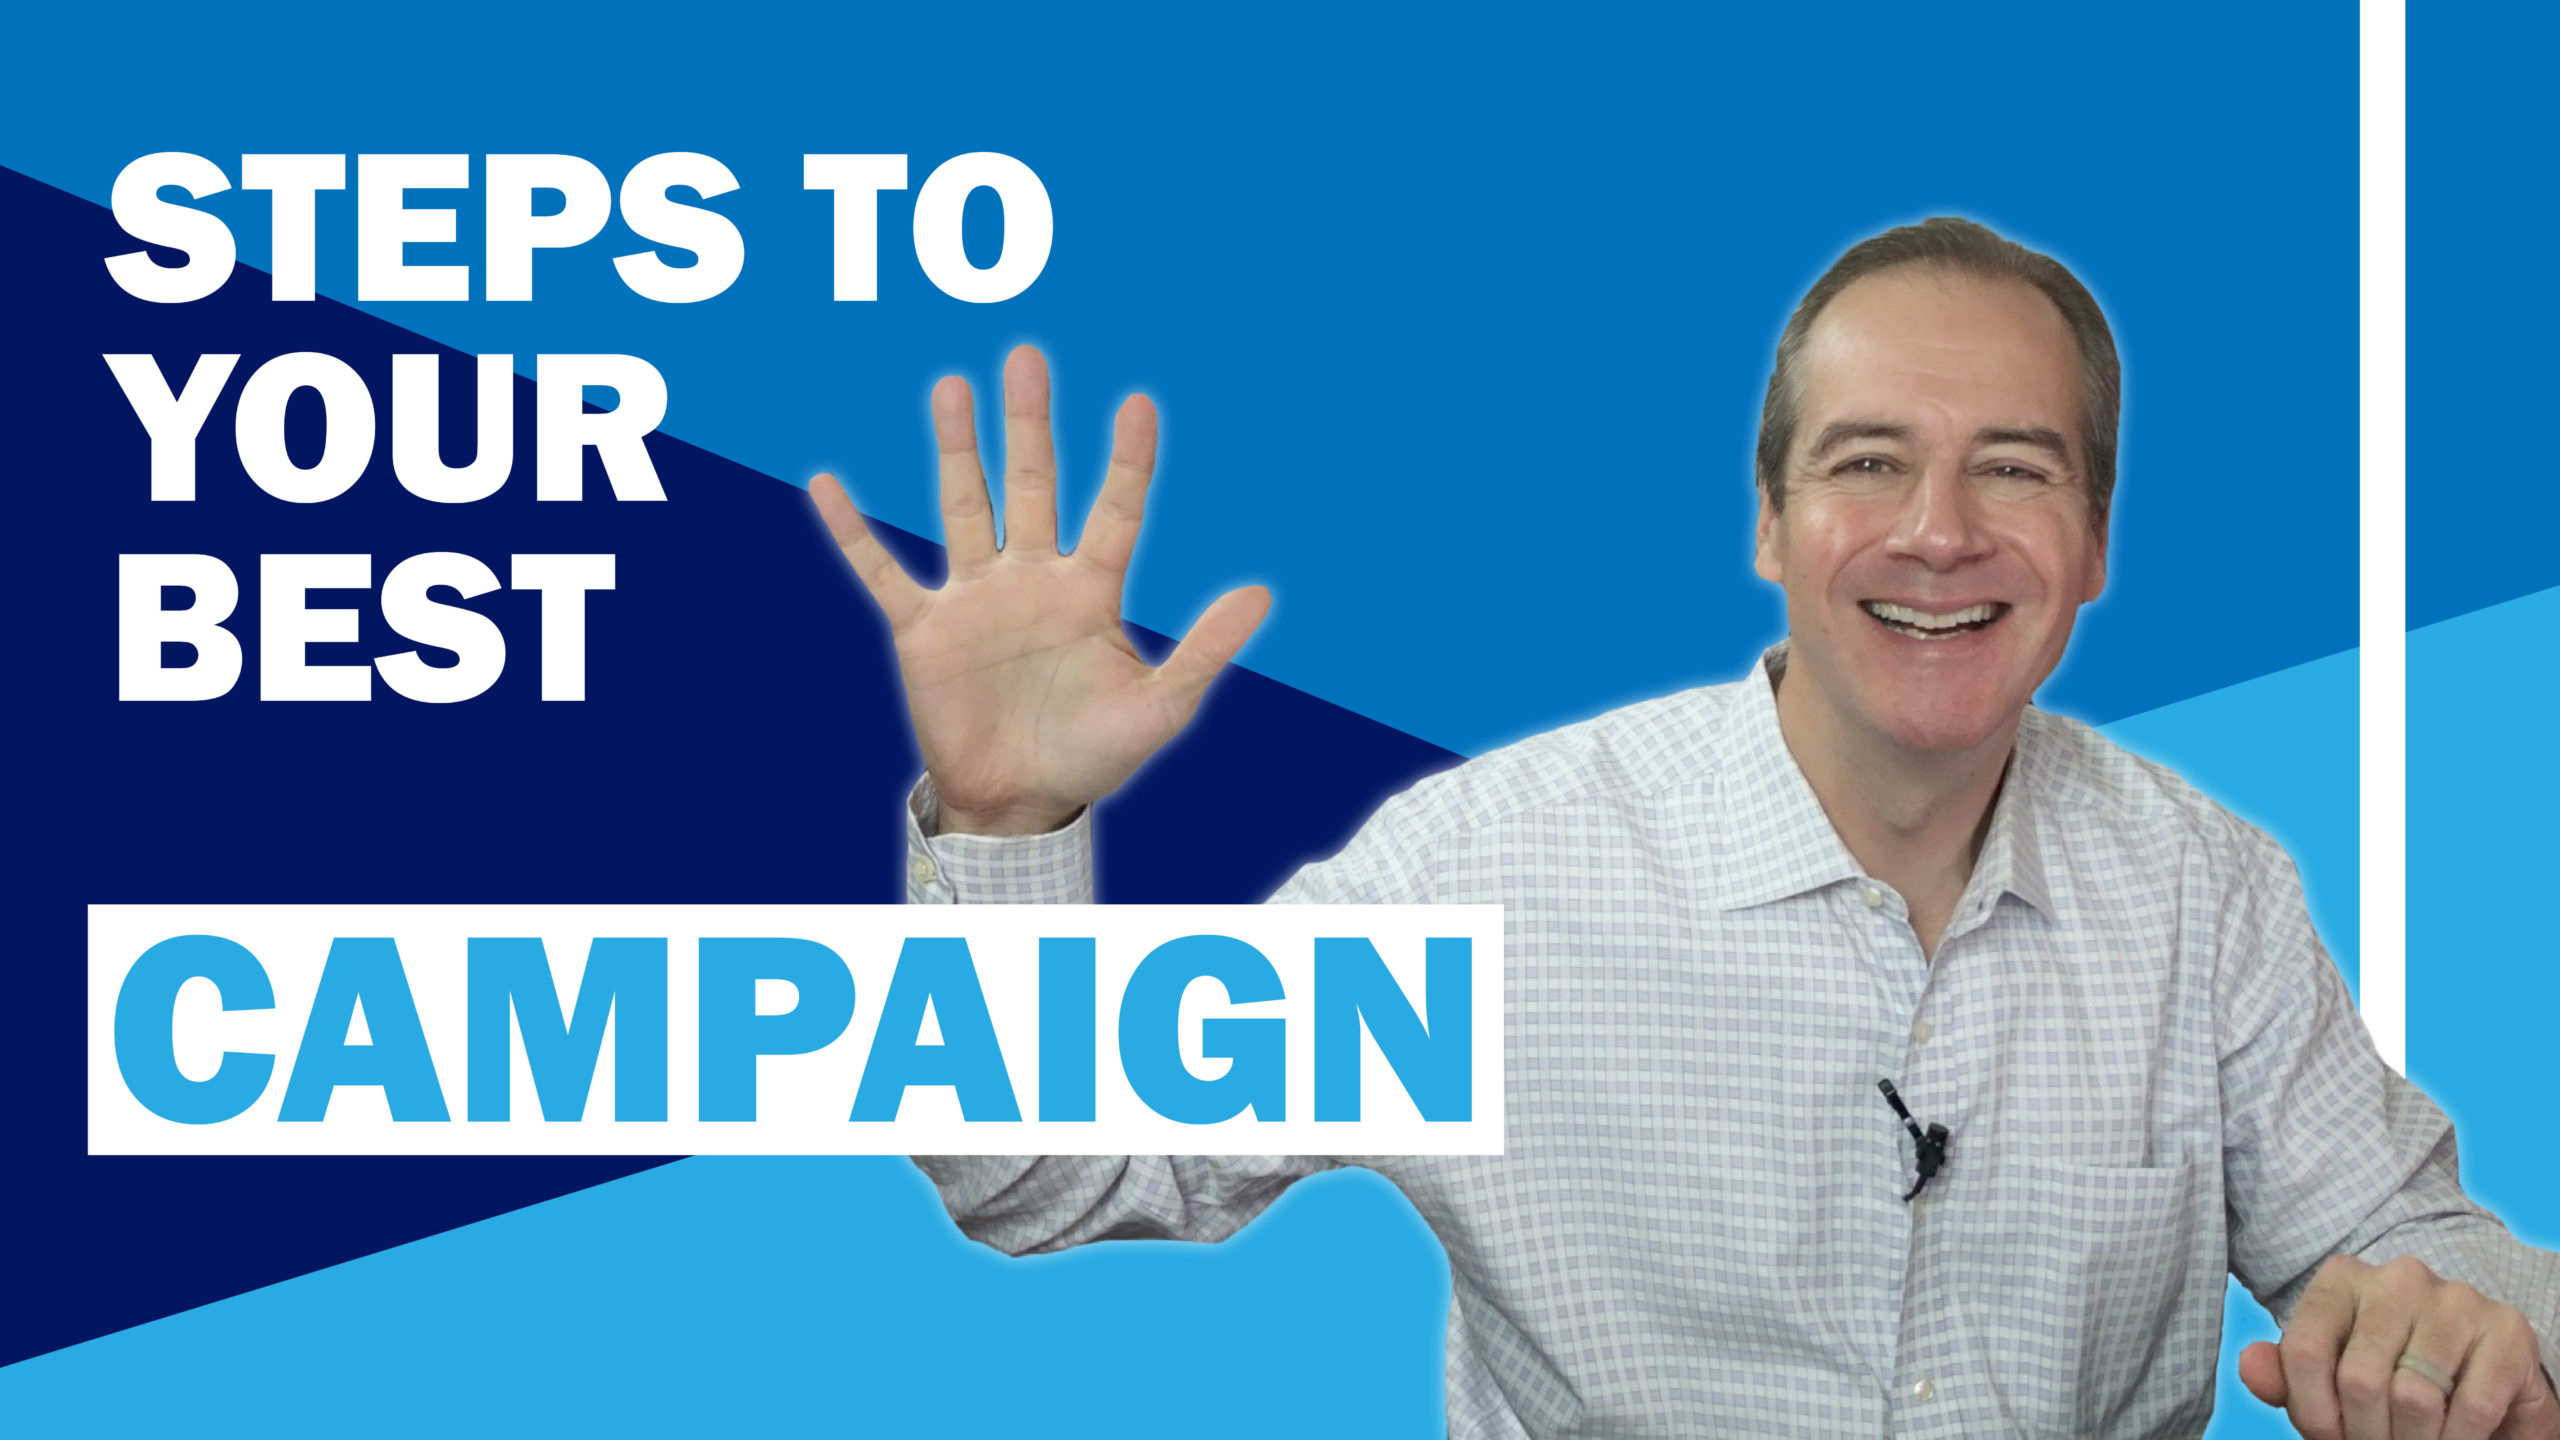 5 Steps to Your Best Campaign